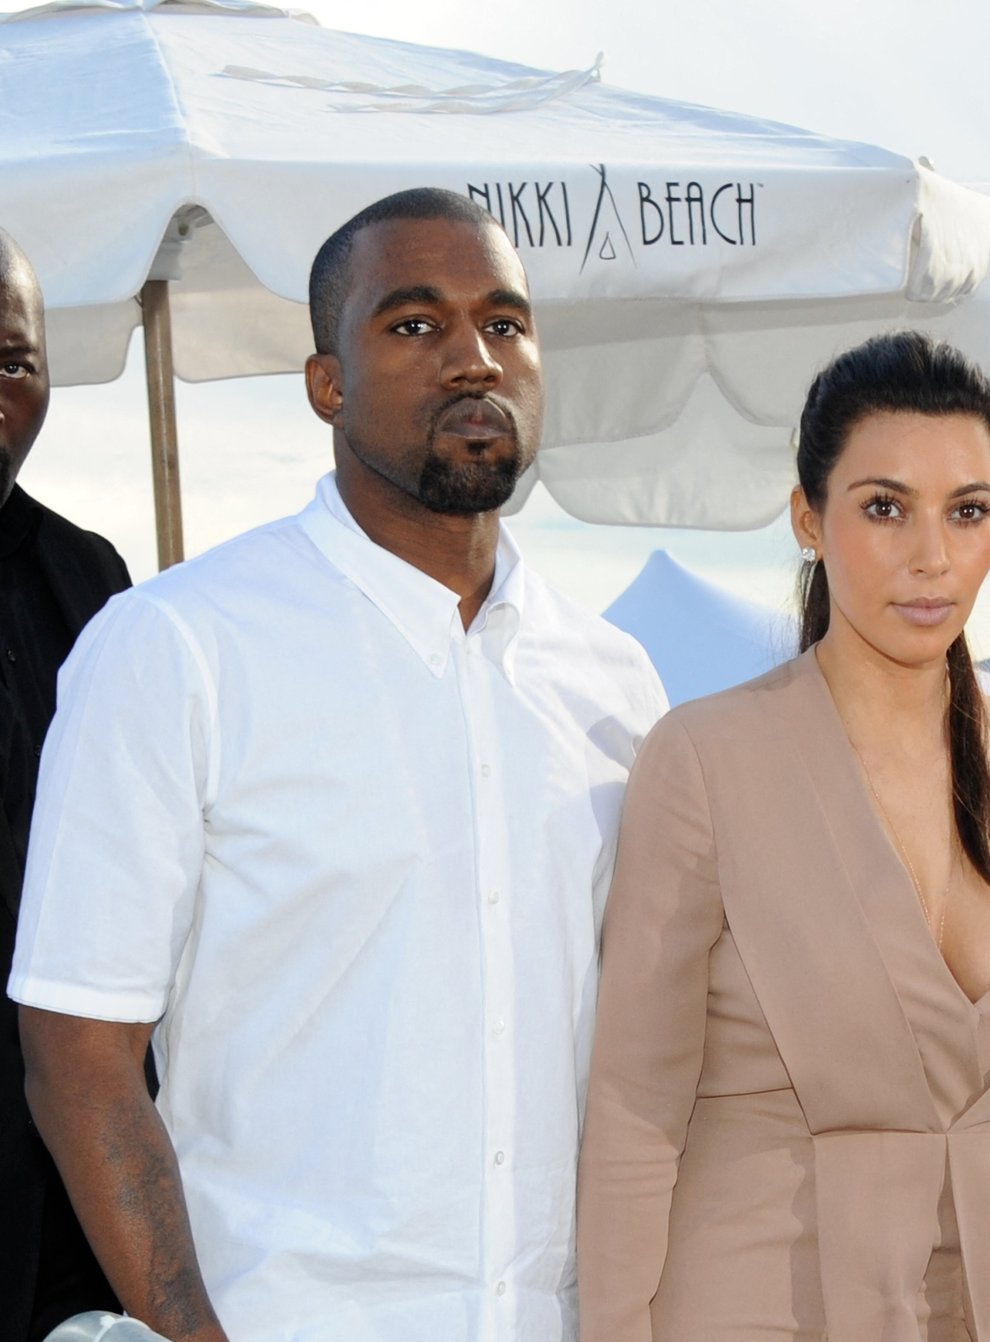 Kim and Kanye married in May 2014